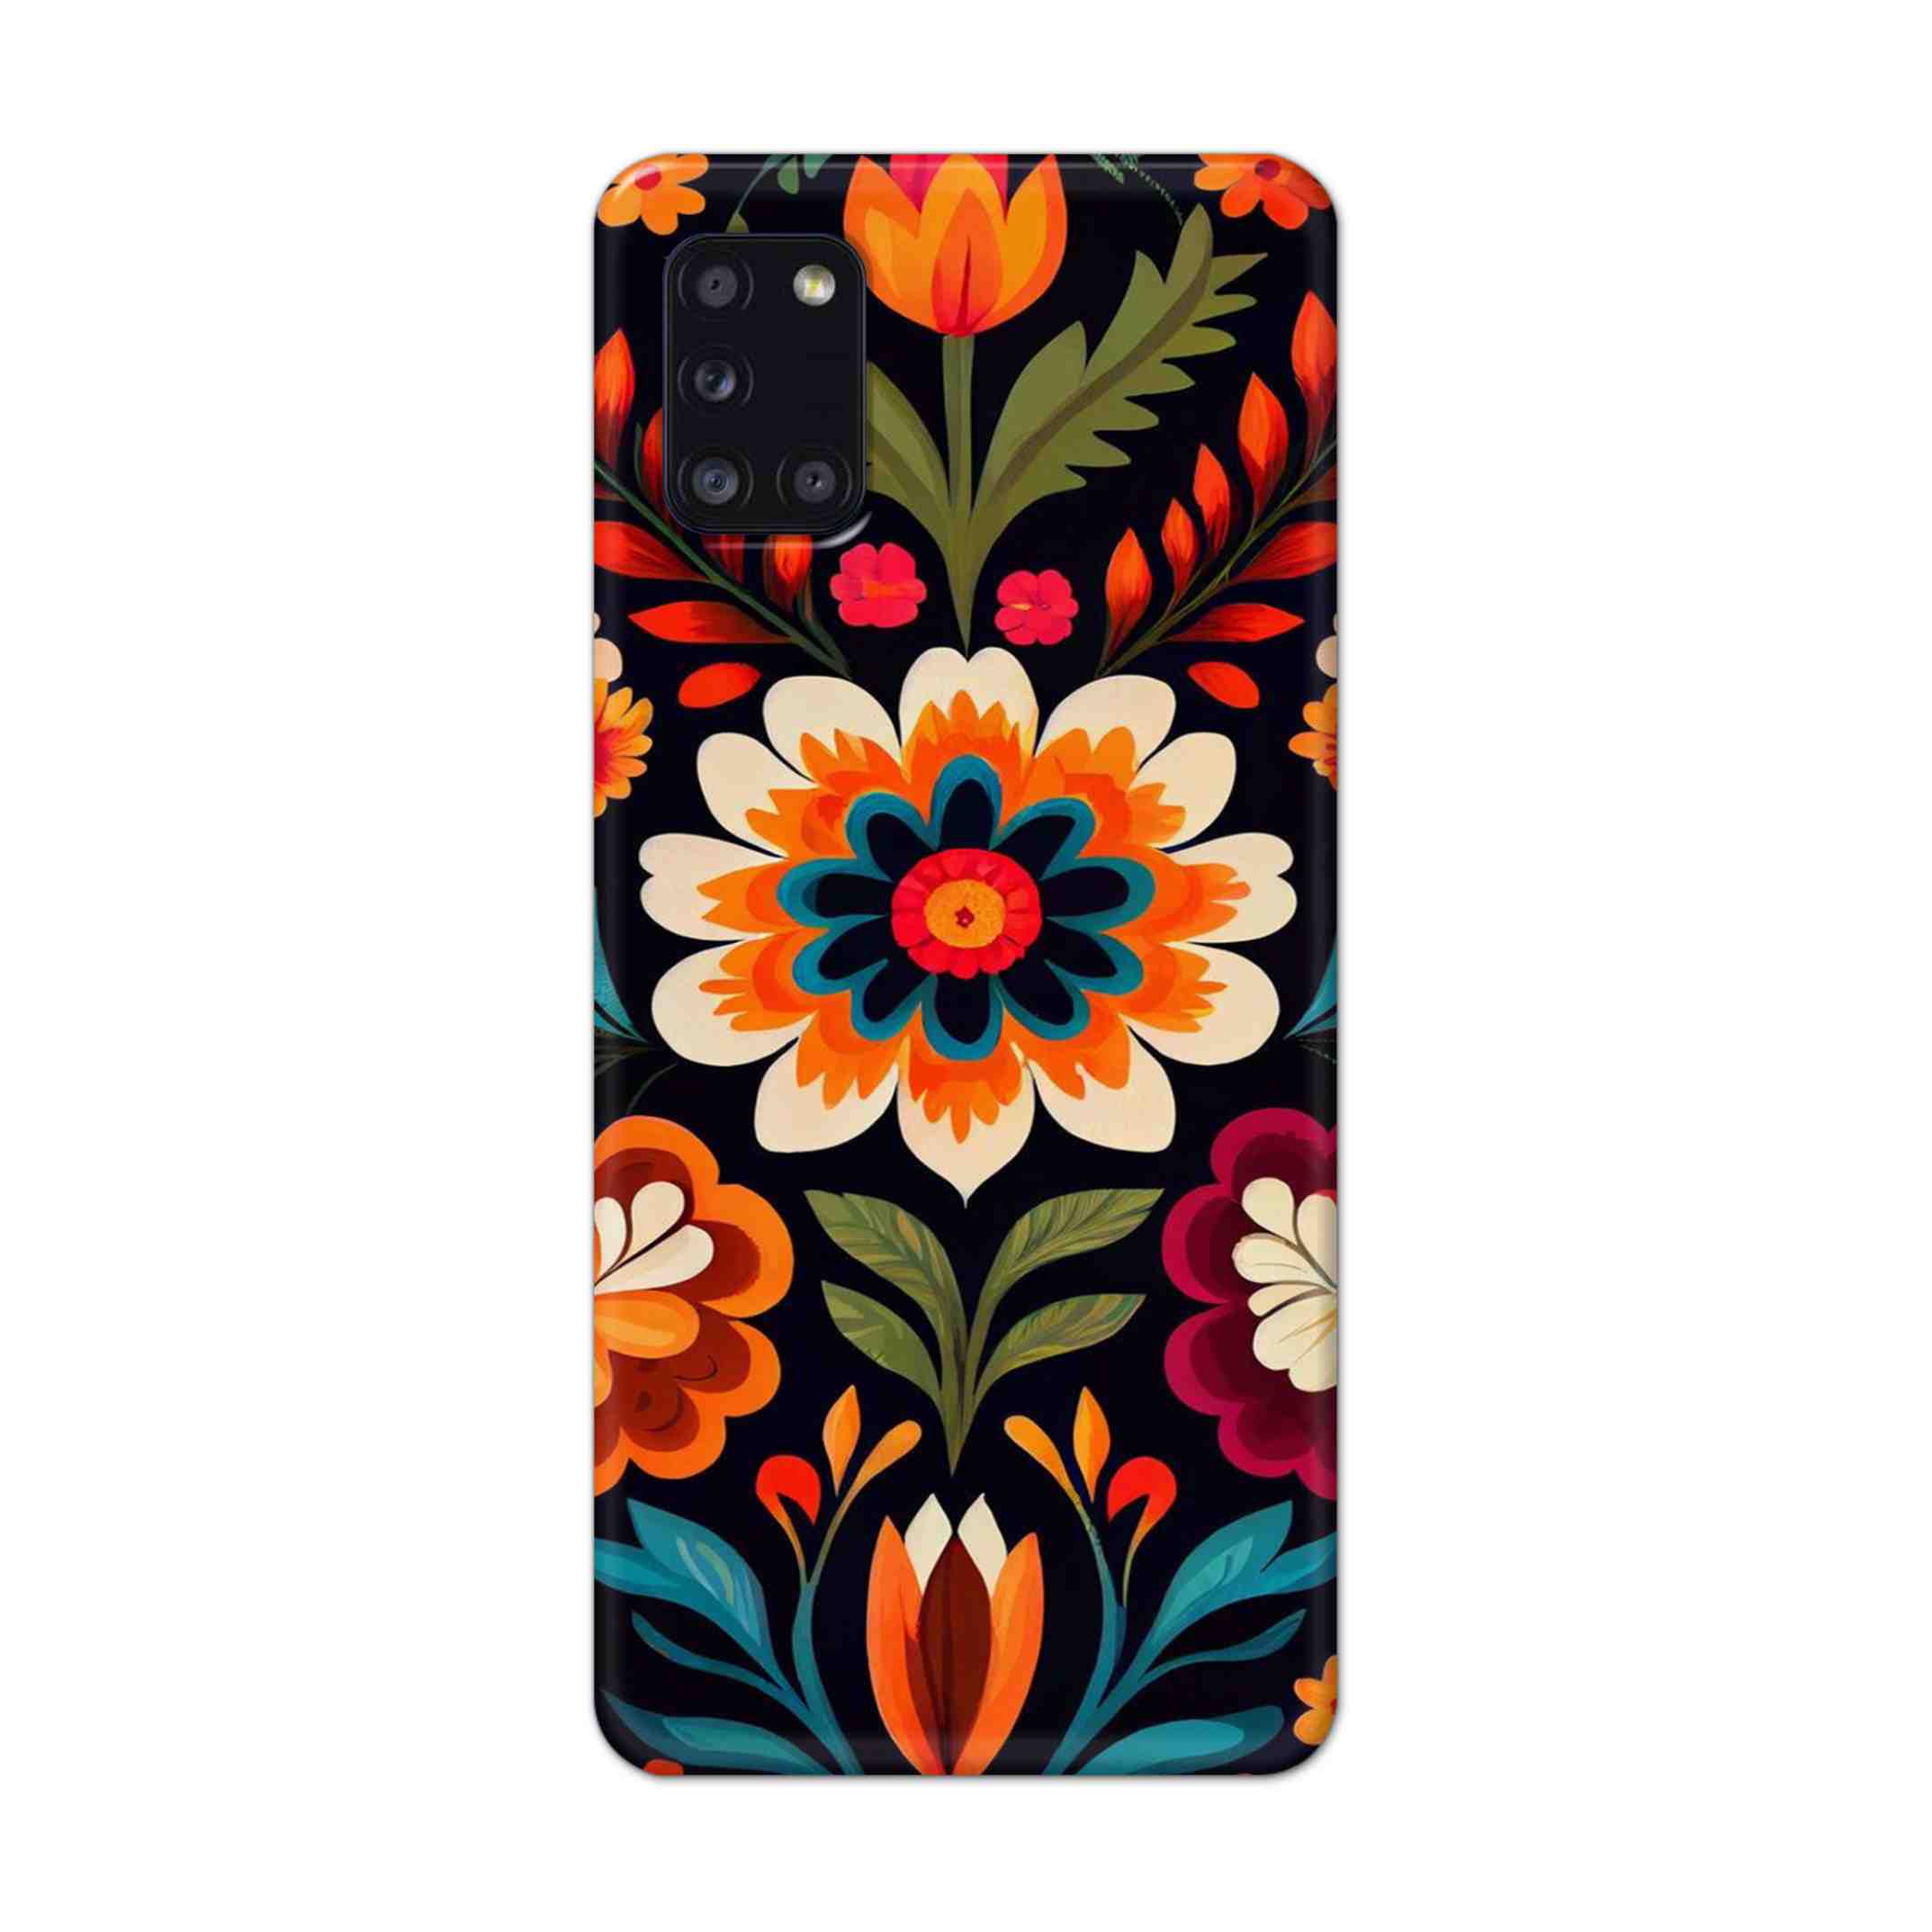 Buy Flower Hard Back Mobile Phone Case Cover For Samsung Galaxy A31 Online